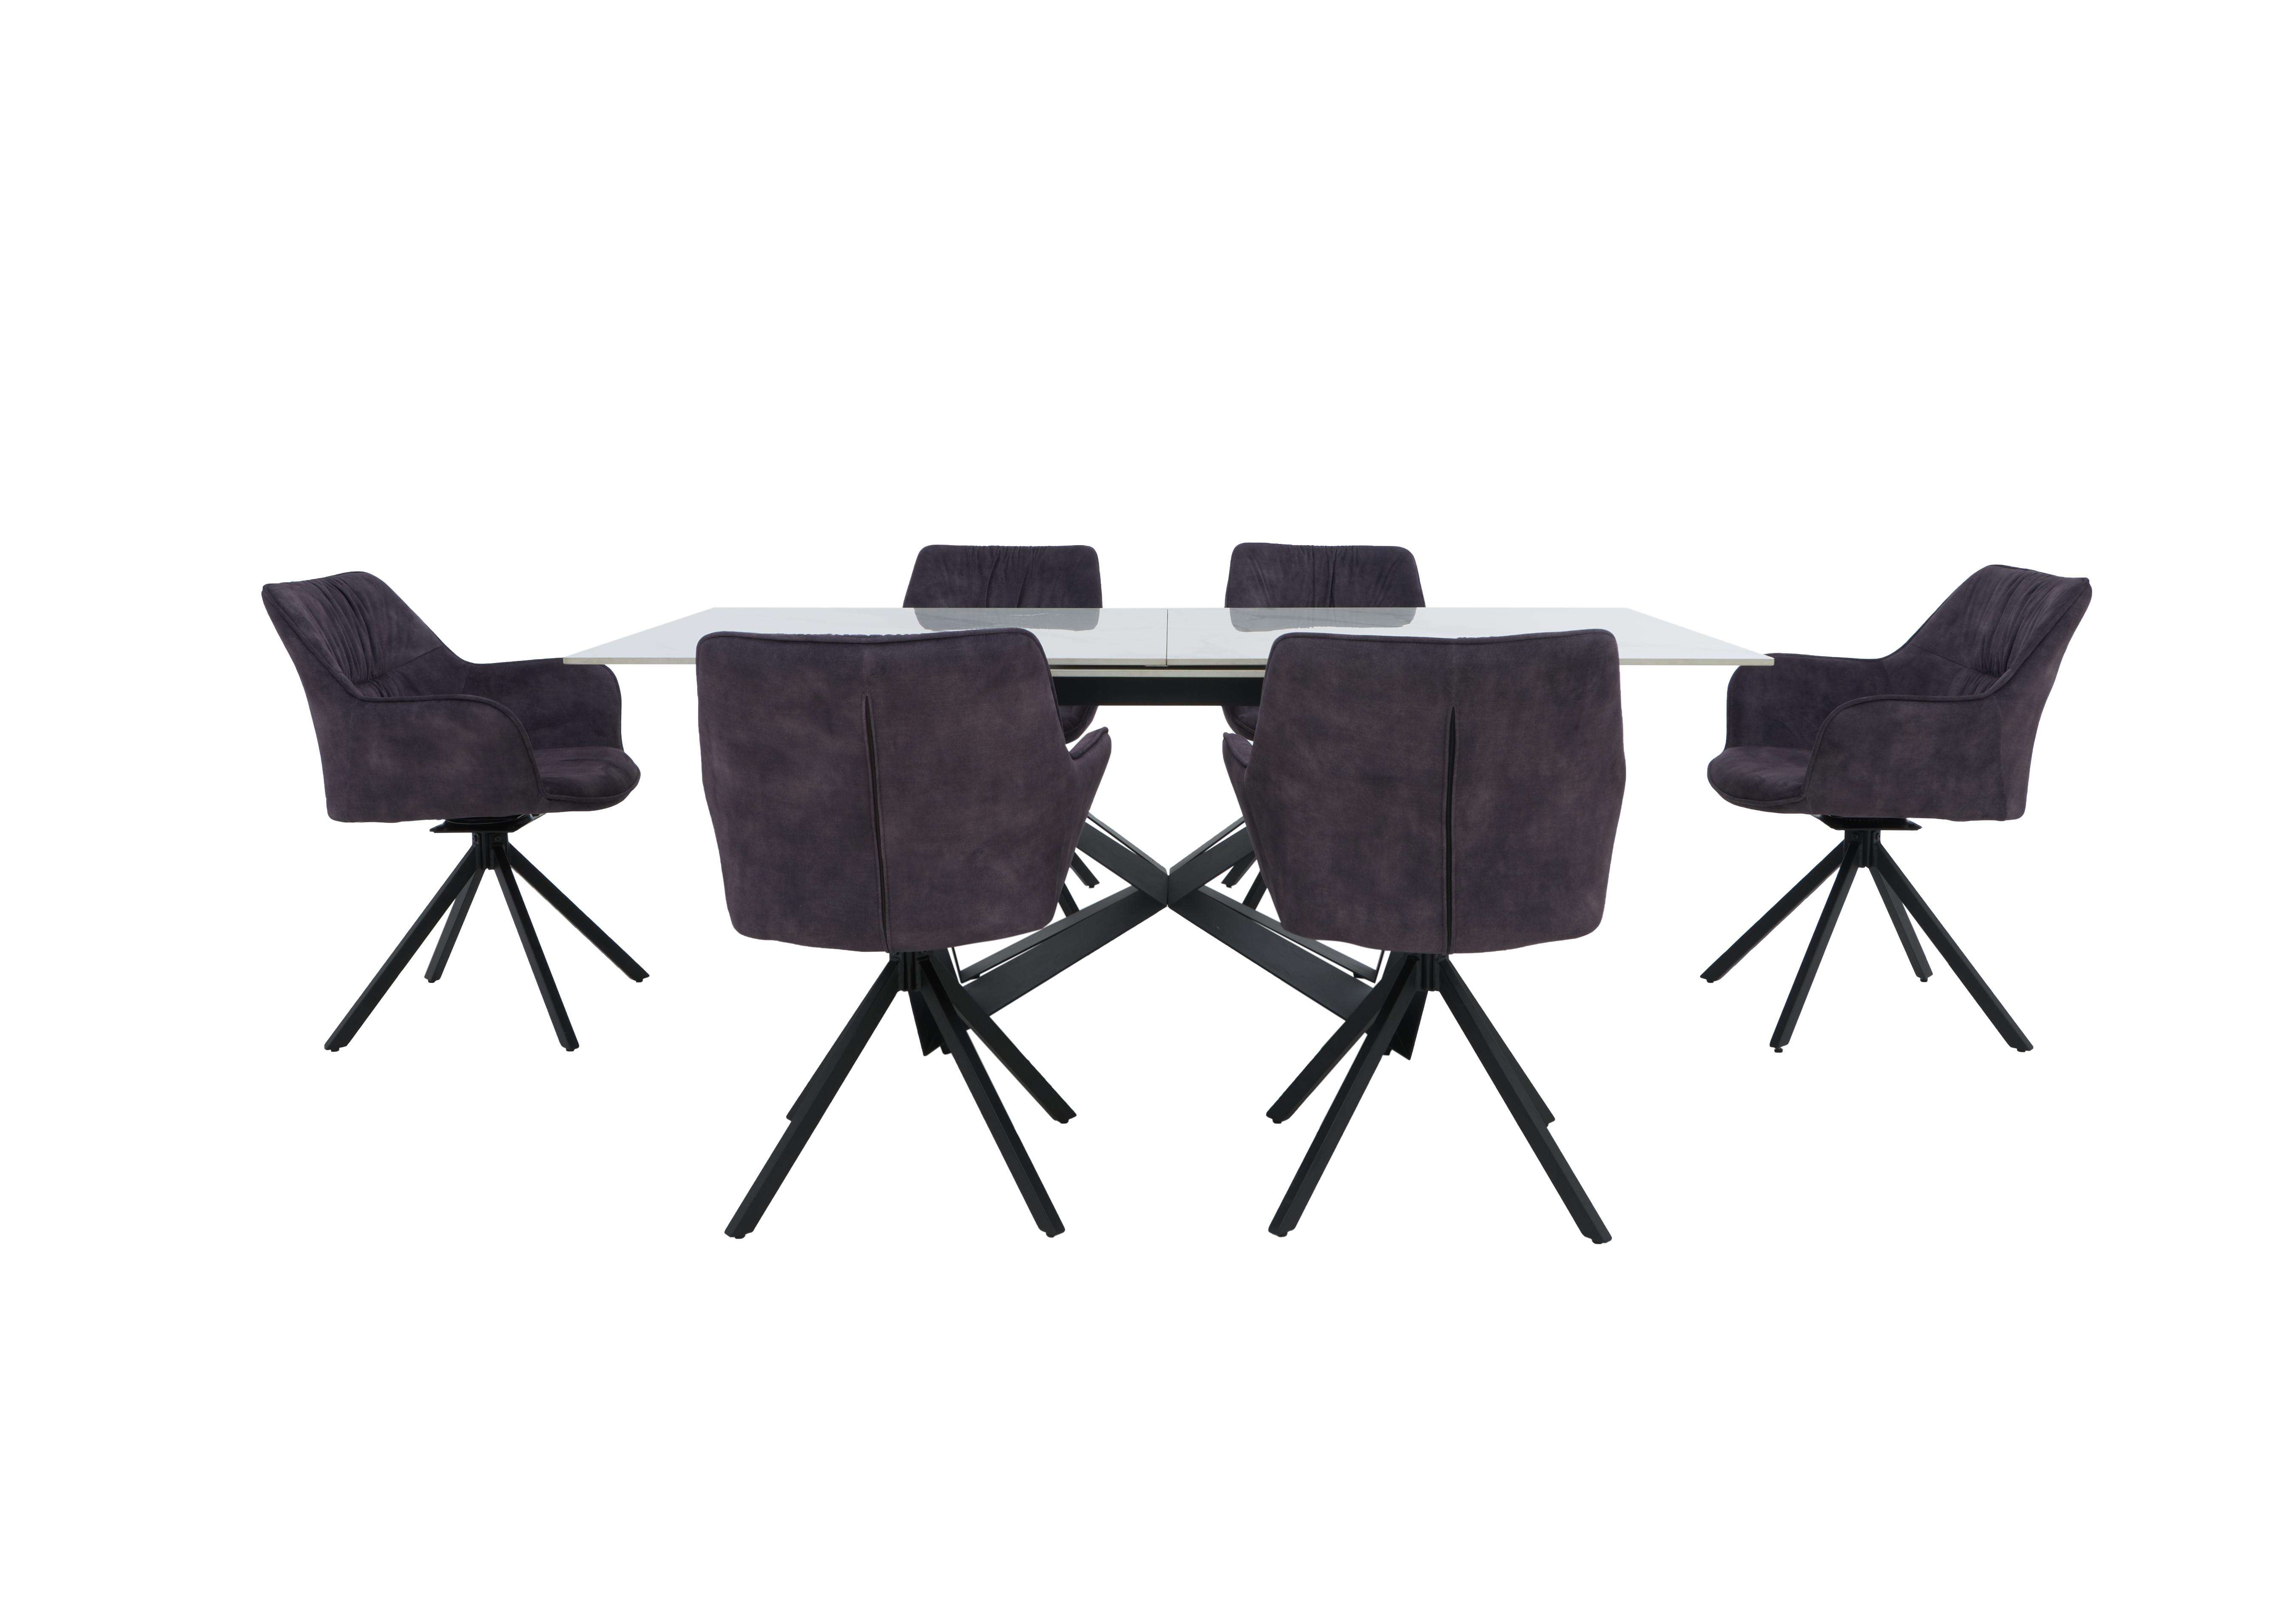 Marvel Black 200 cm Extending Dining Table and 6 Swivel Dining Chairs in Charcoal on Furniture Village